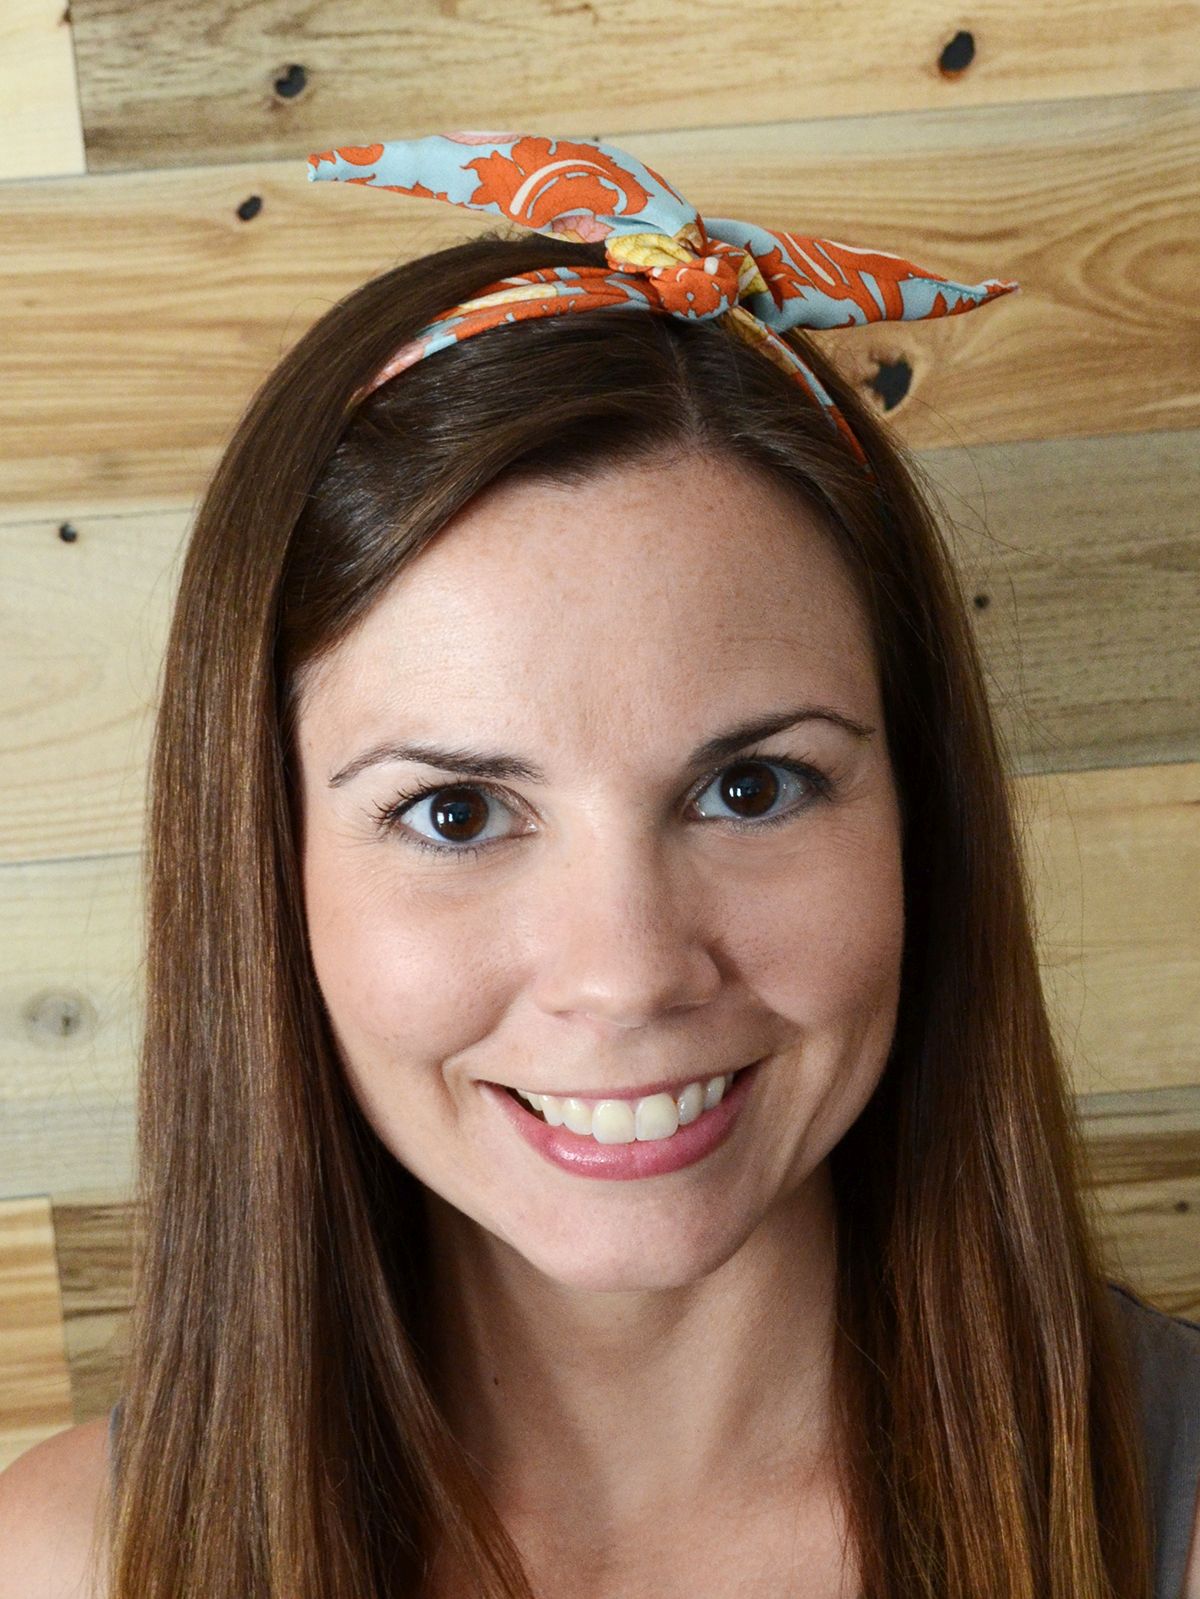 How to make a wired hair bow for hot summer days